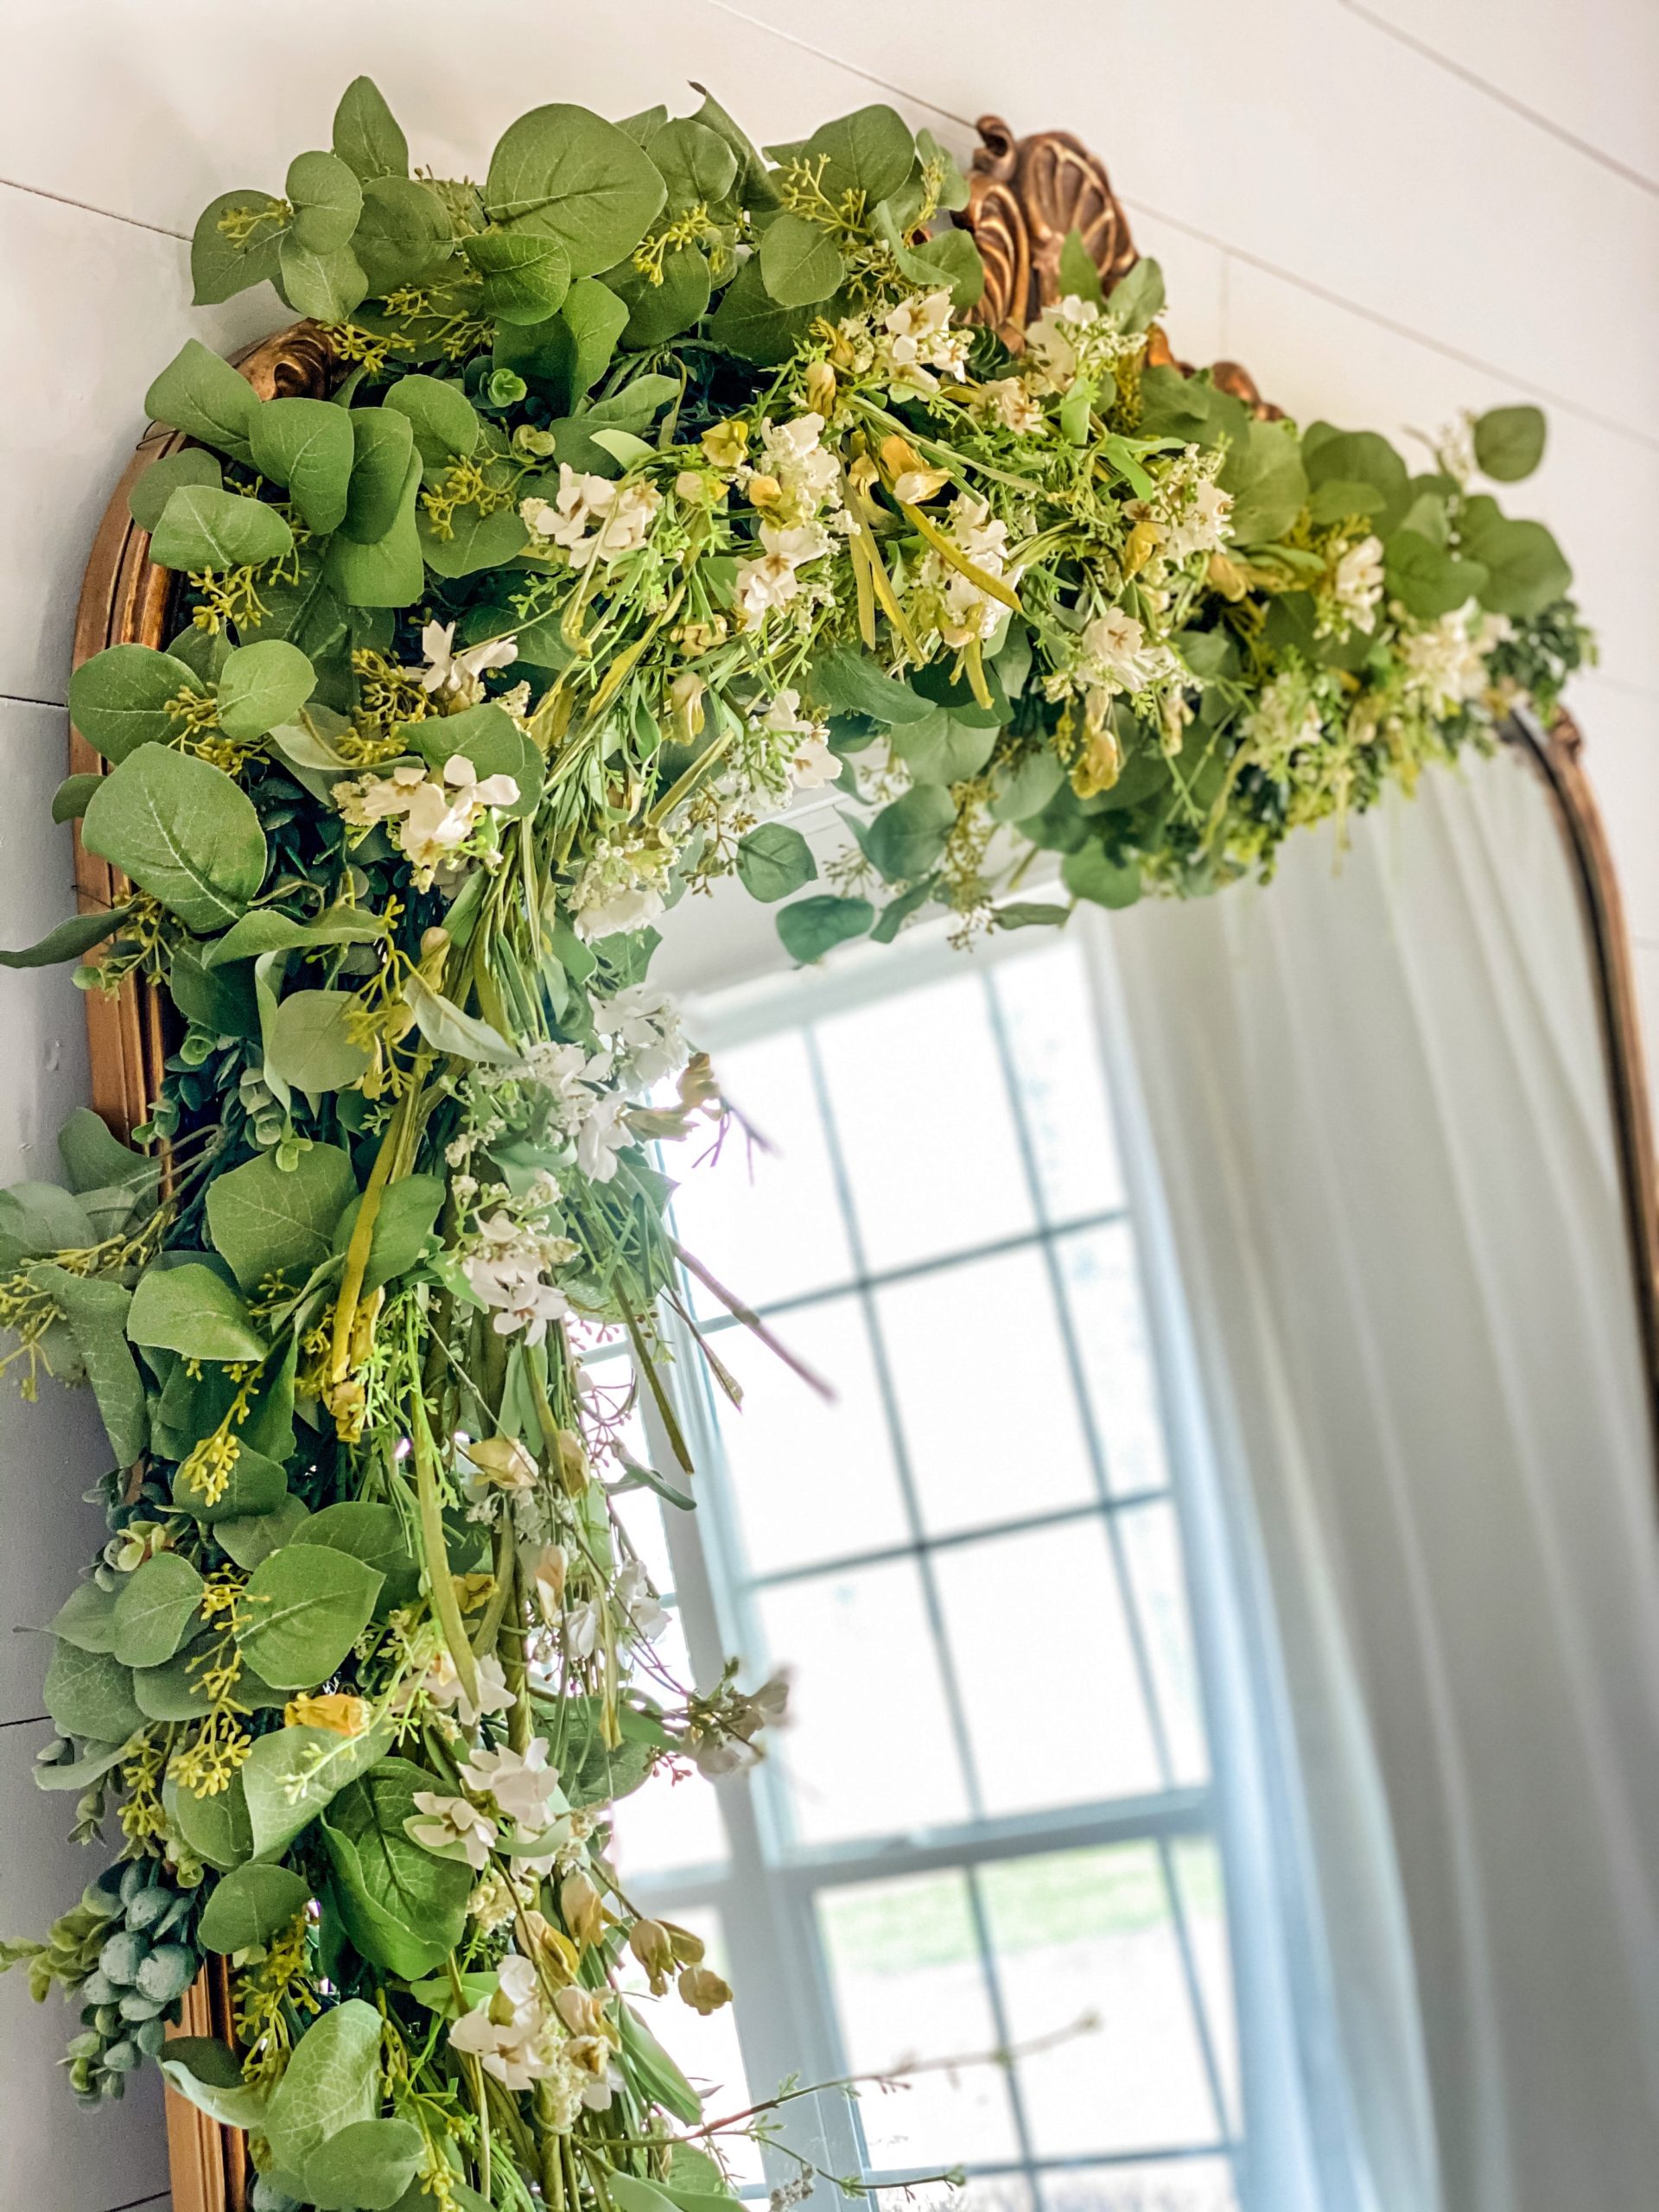 How to Decorate a Mirror with Greenery - Cotton Stem